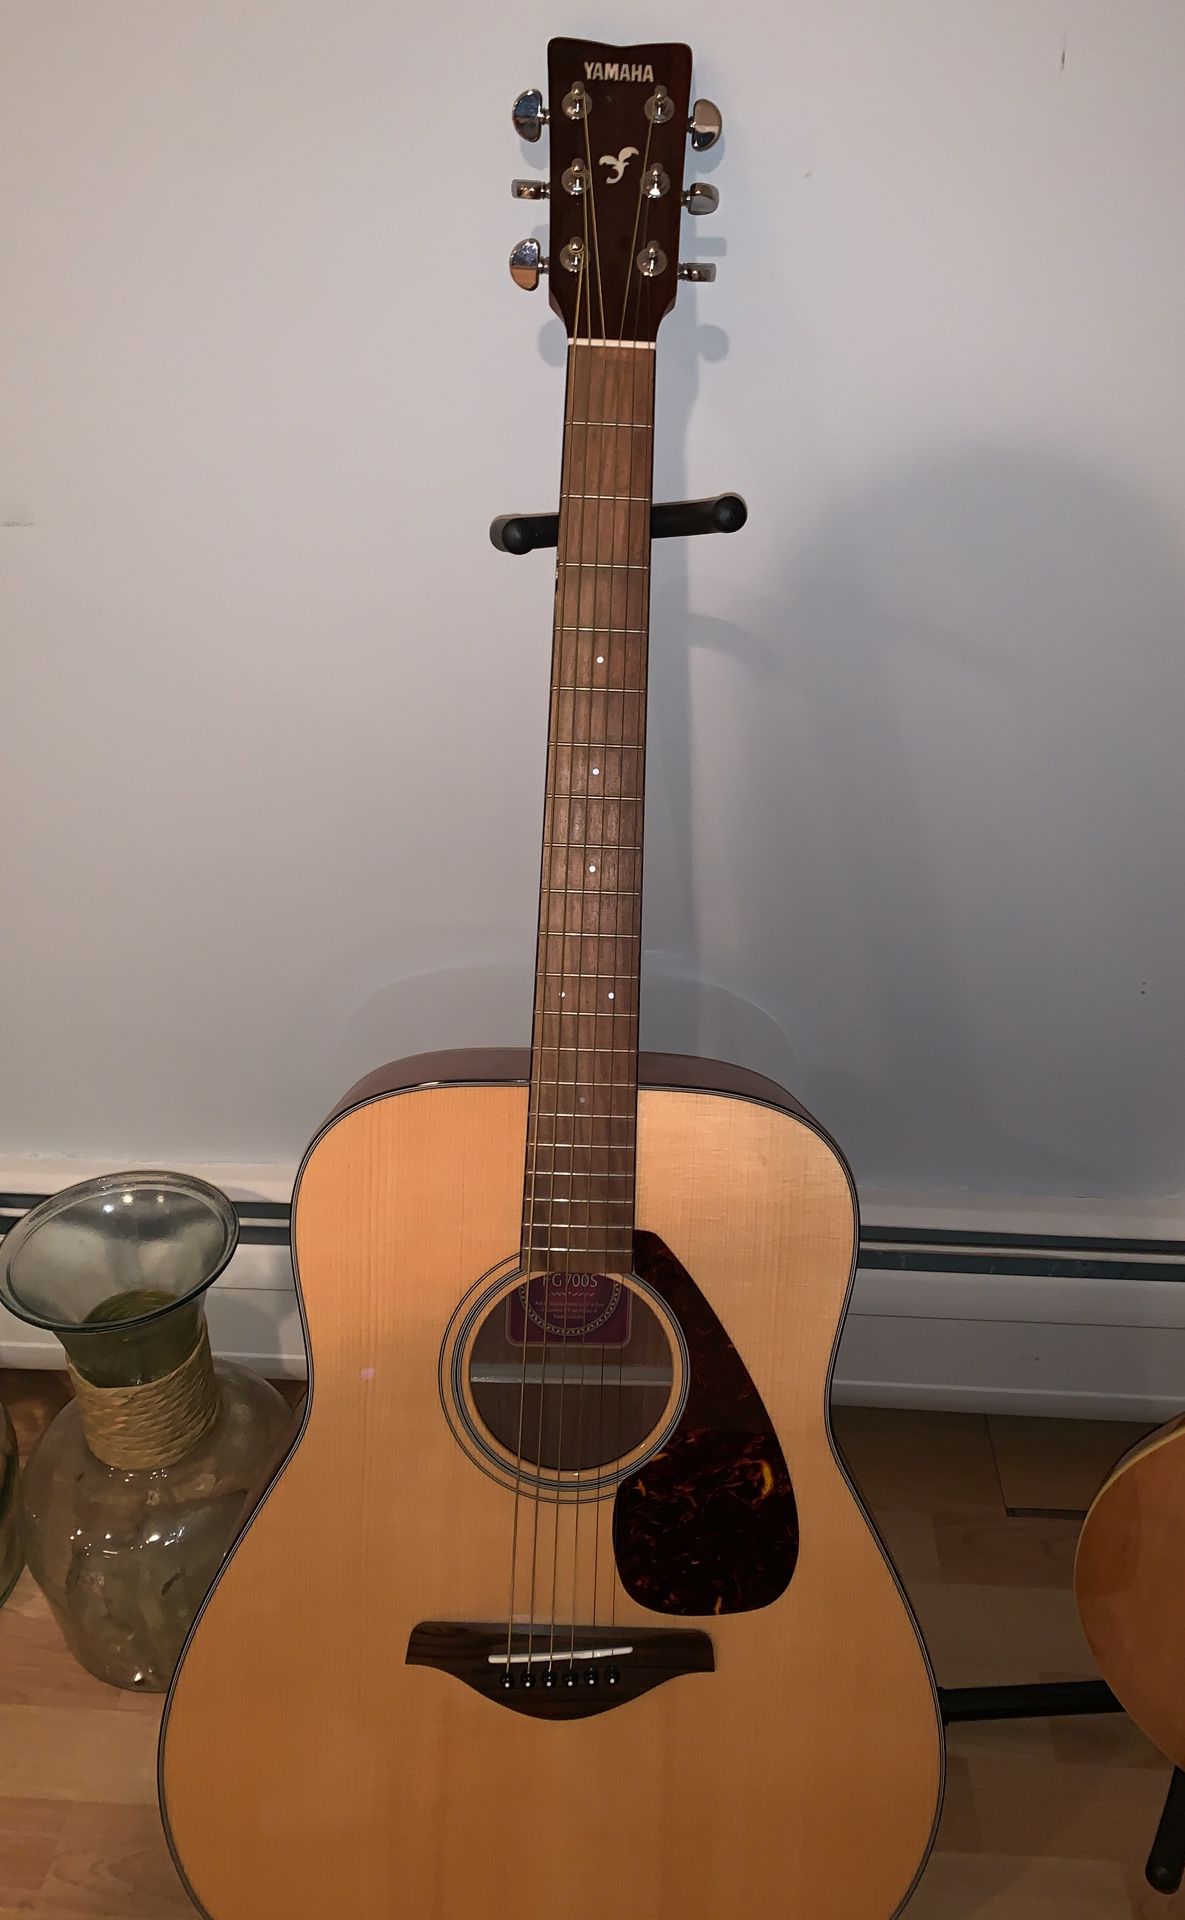 Yamaha acoustic guitar perfect condition